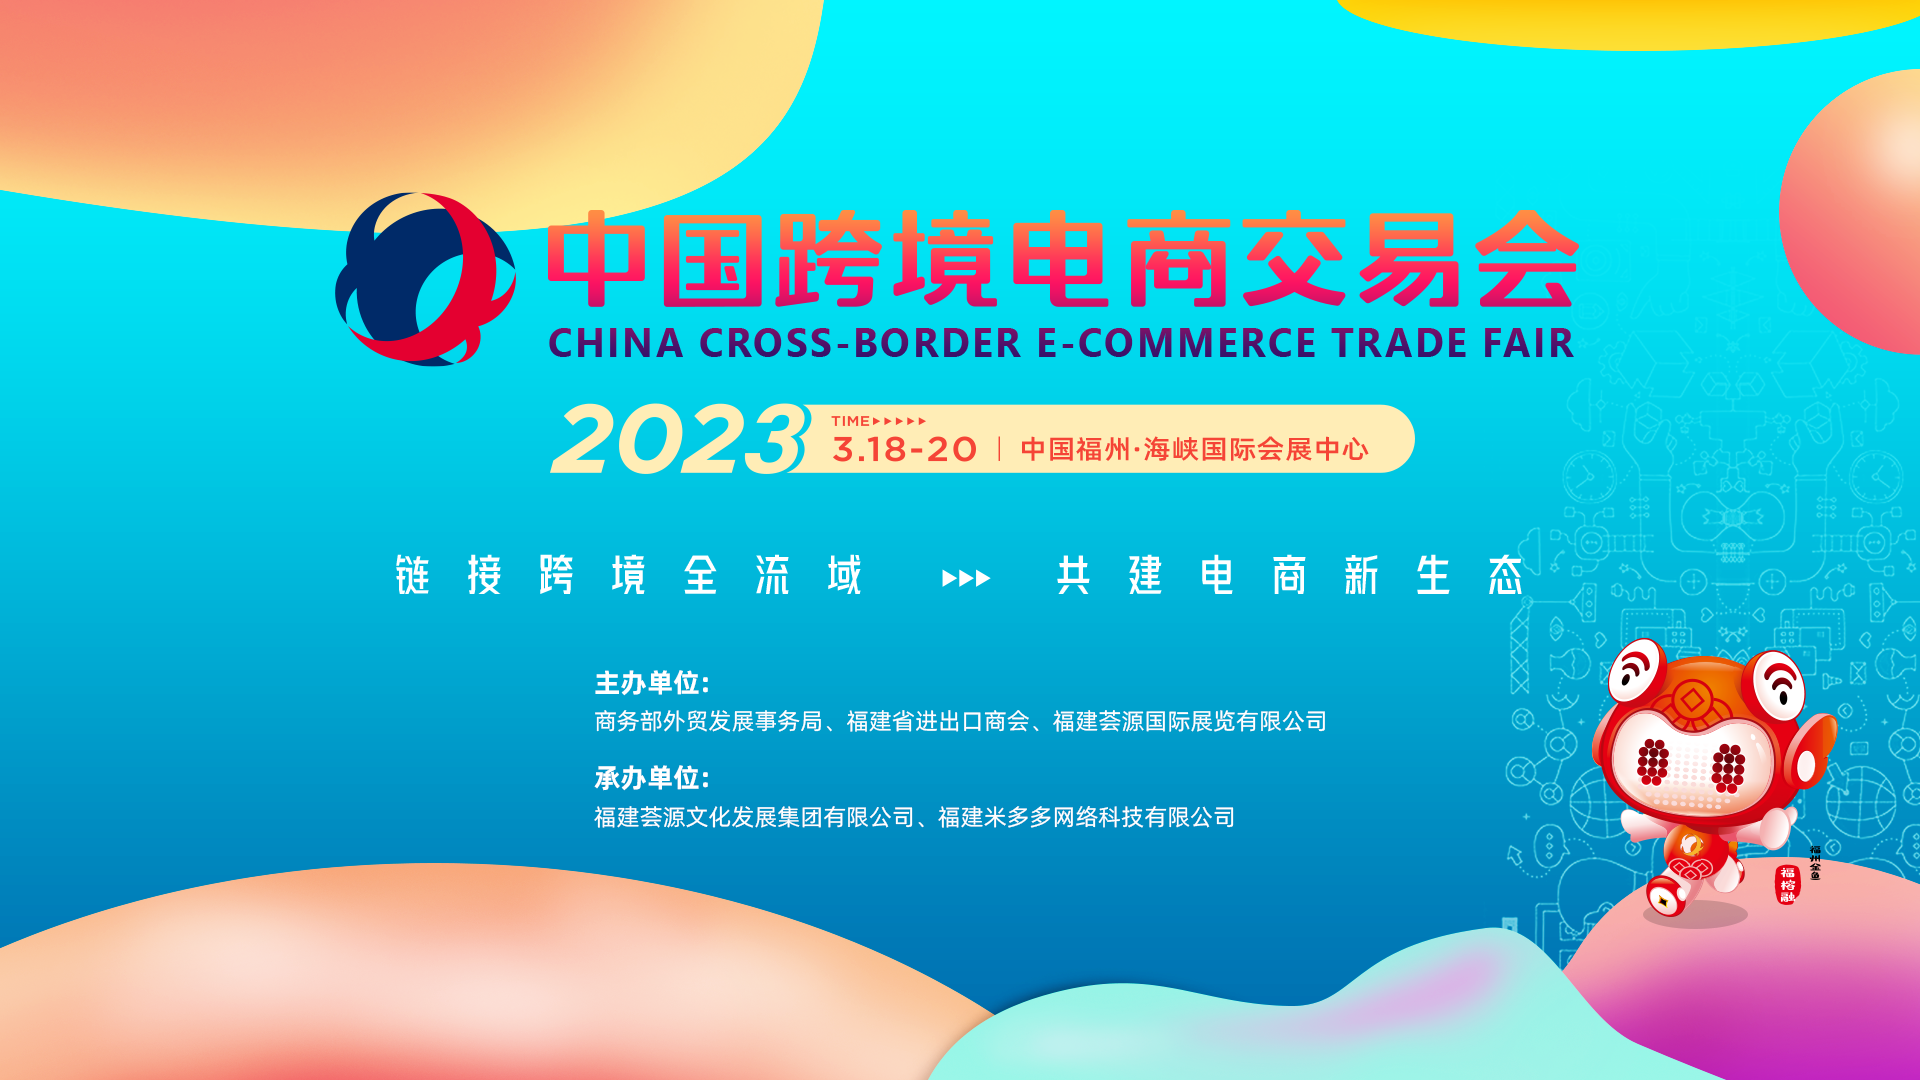 Is it difficult to book a hotel during the exhibition?Check out the 2023 Cross-Trade Fair booking guide!